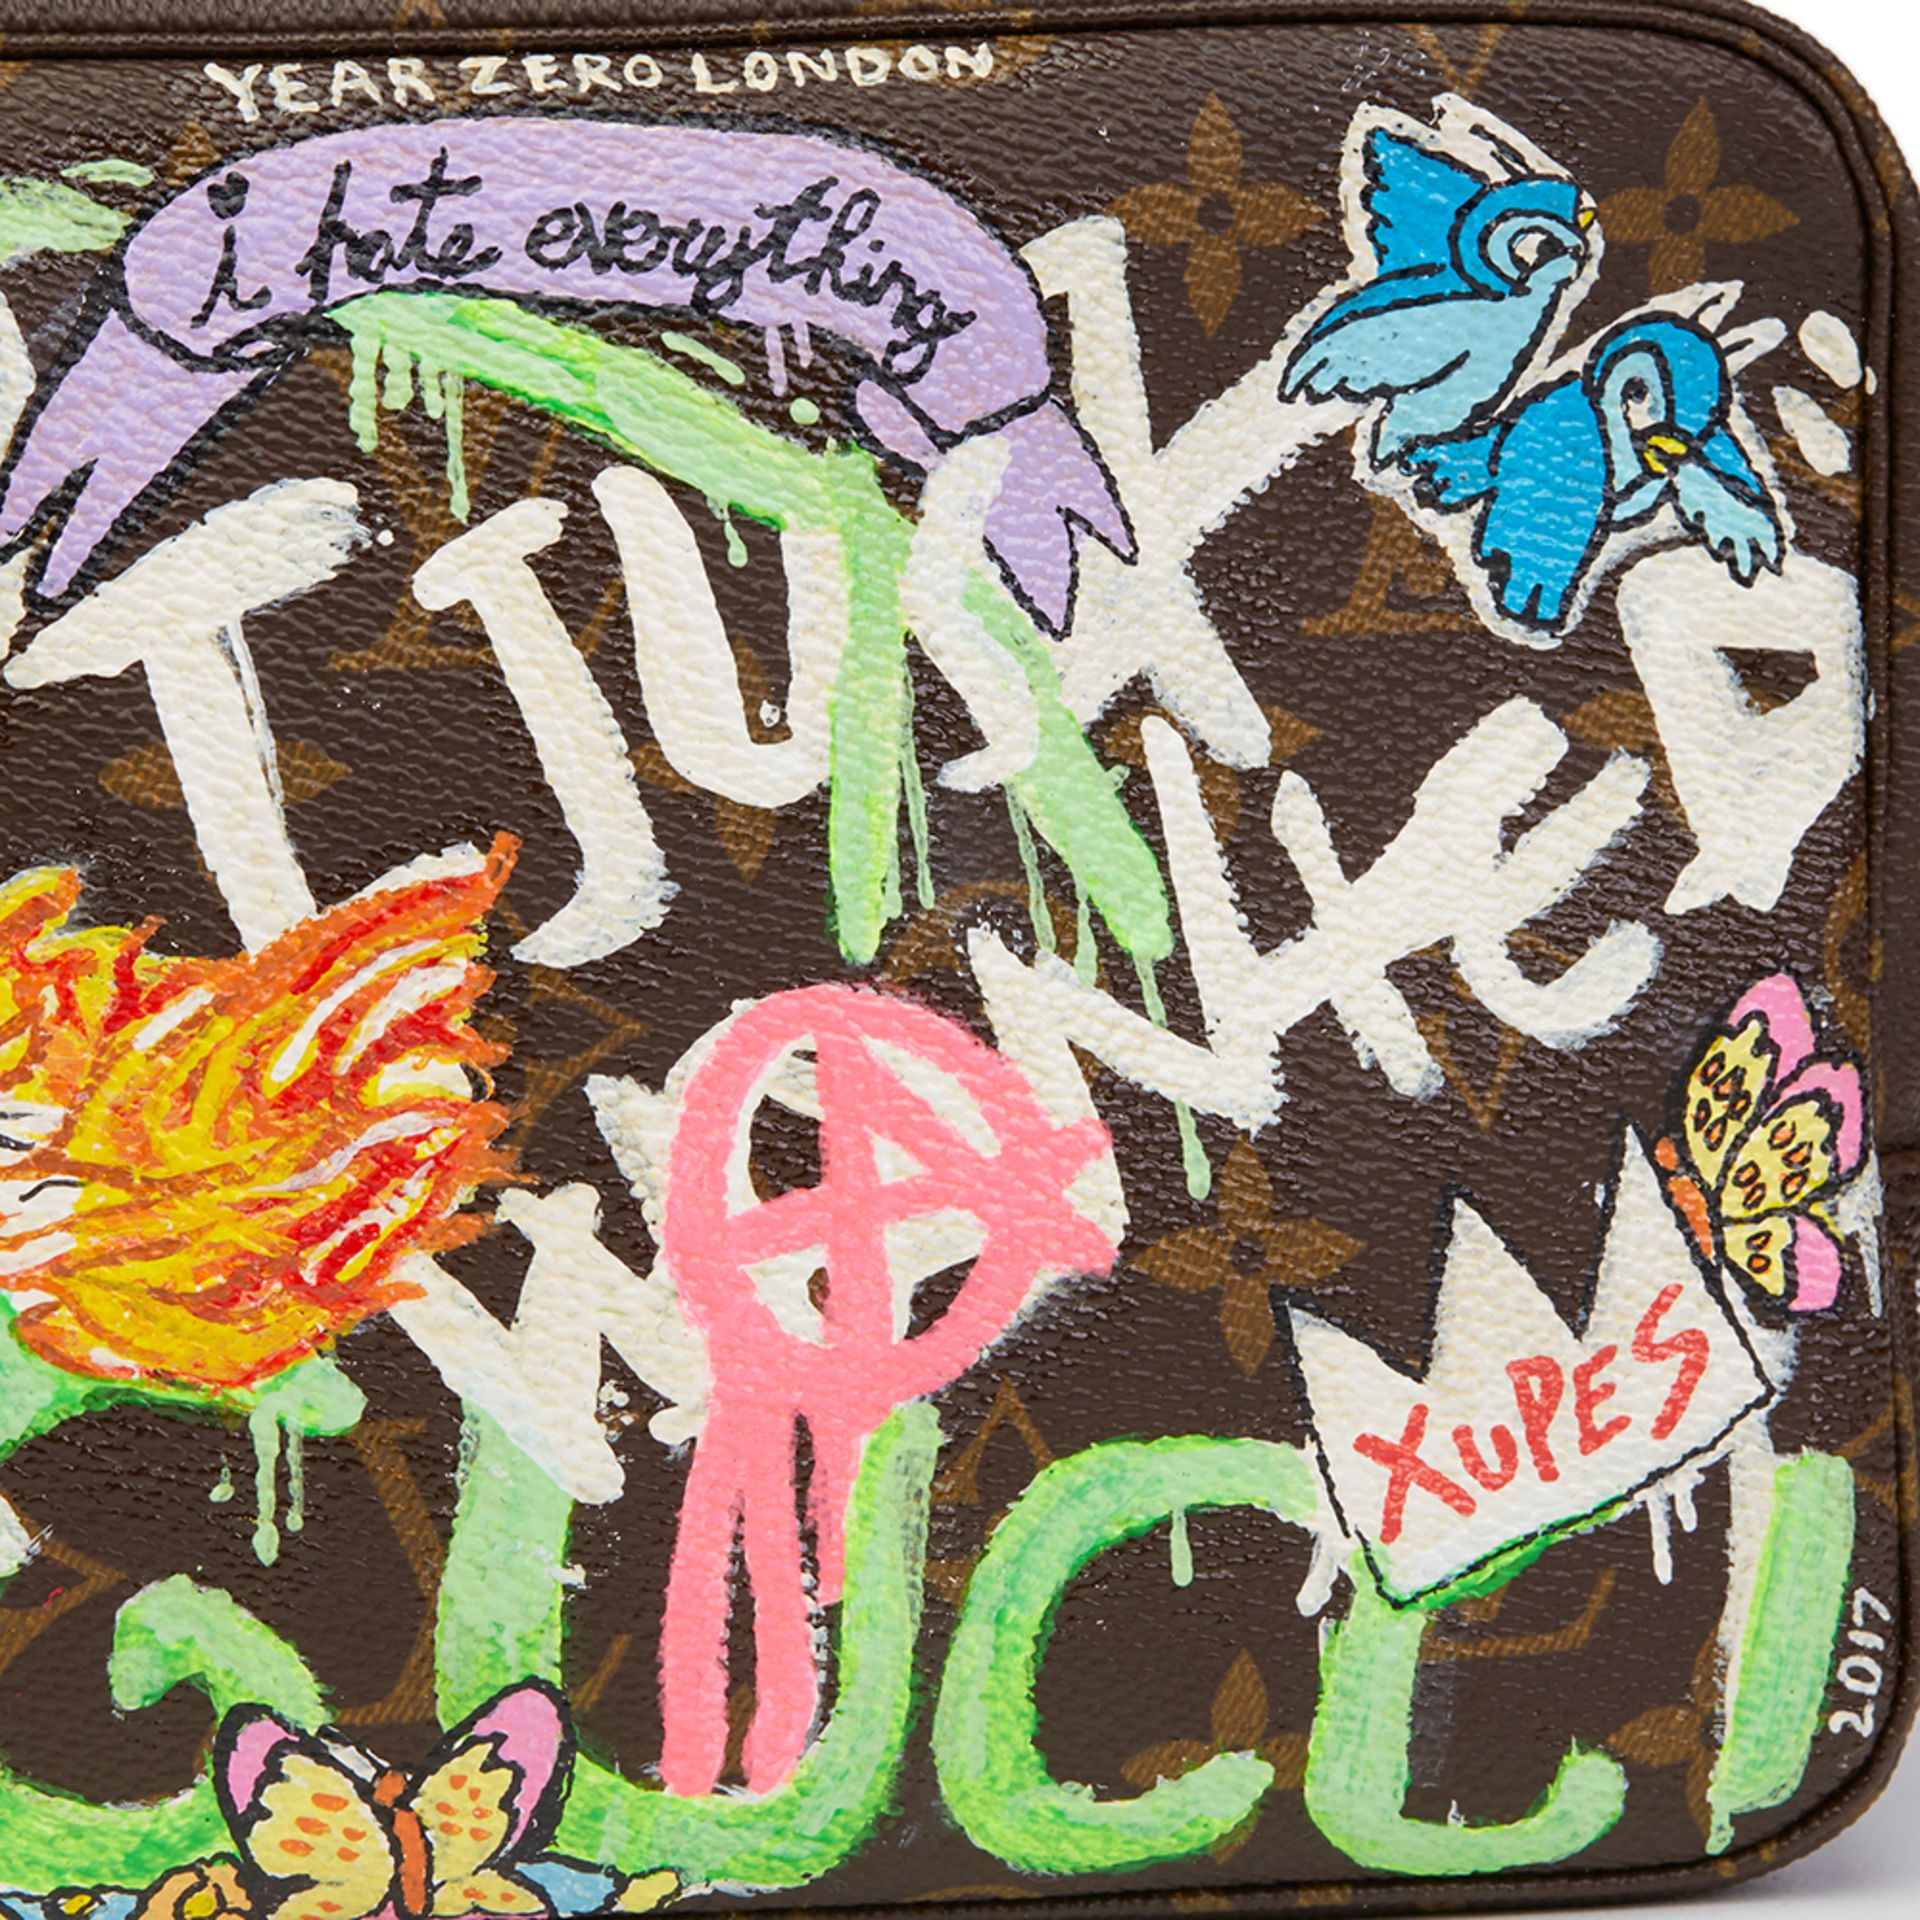 Hand-painted 'I just wanted Gucci' X Year Zero London Toiletry Pouch - Bild 10 aus 10